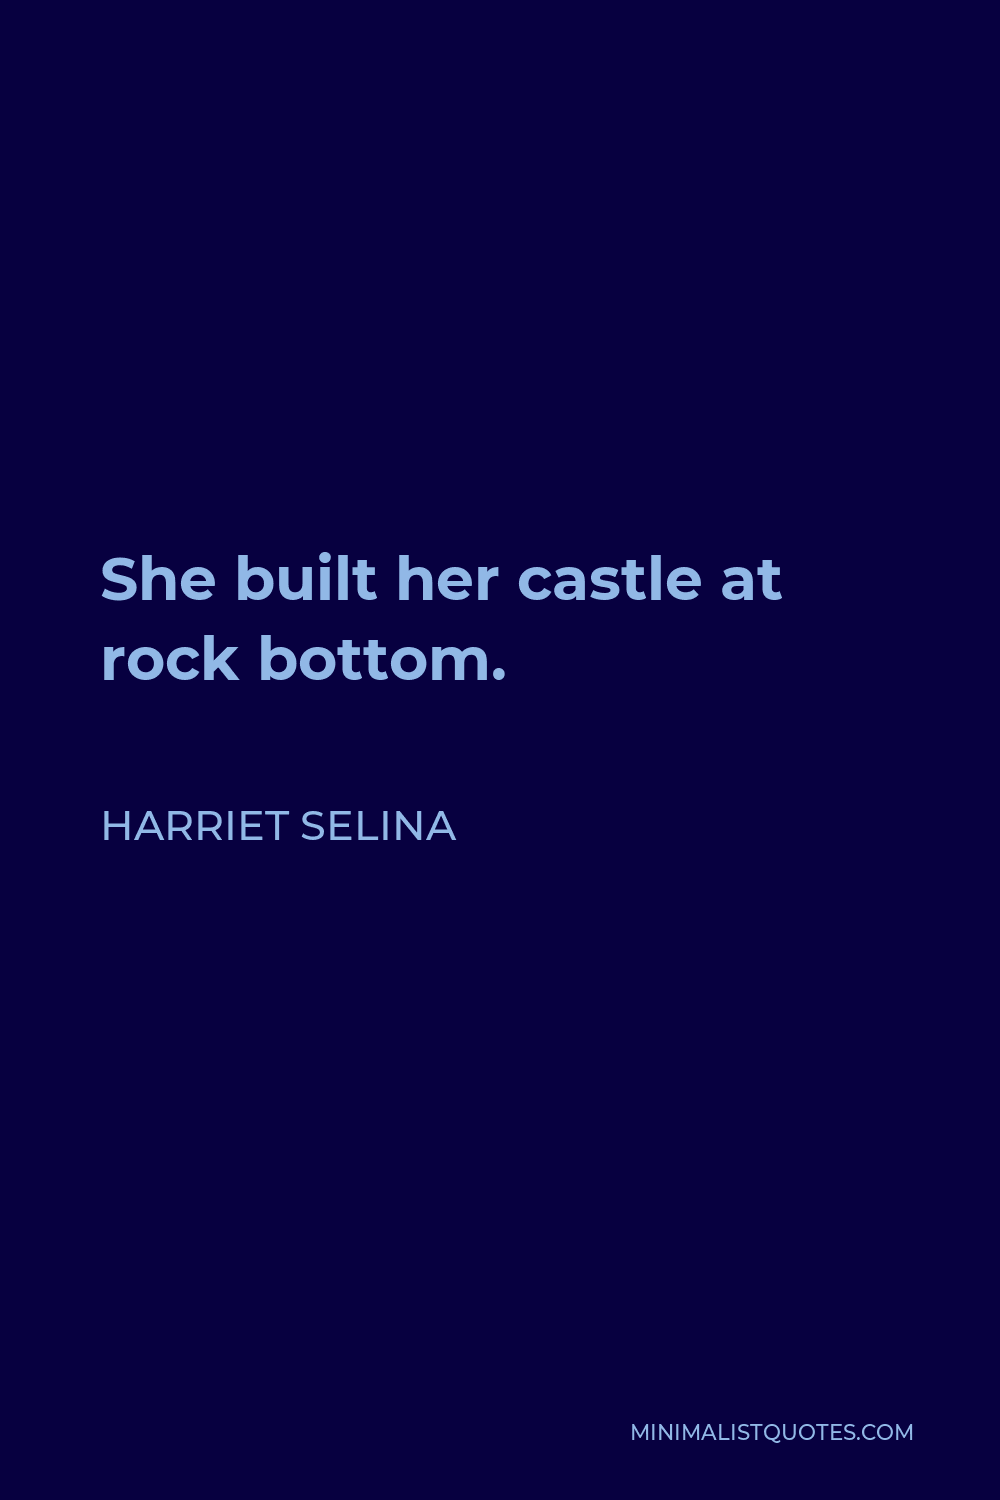 Harriet Selina Quote - She built her castle at rock bottom.